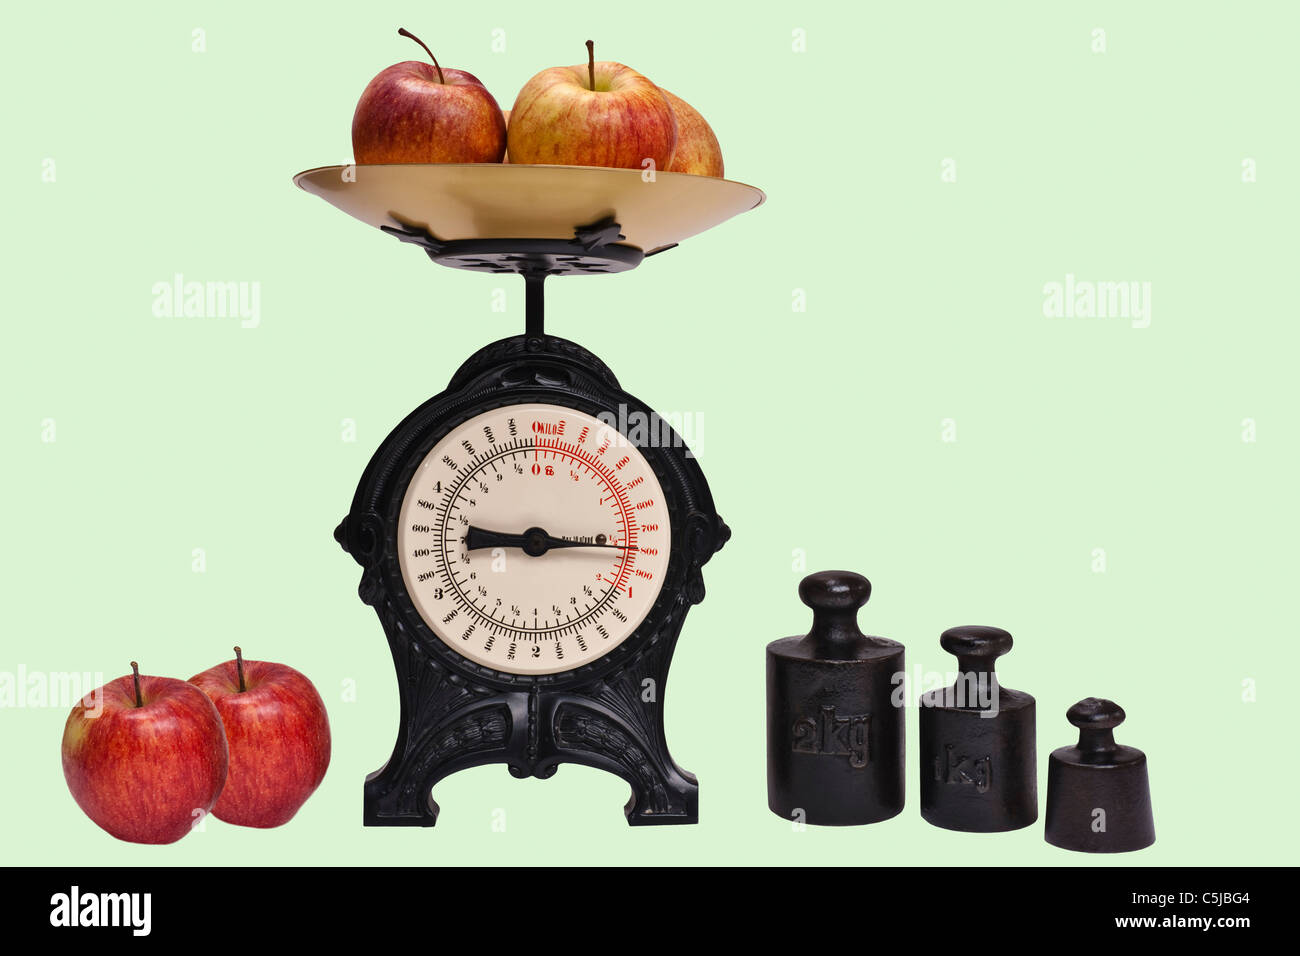 Two apples on a digital kitchen scale - Stock Image - H305/0140 - Science  Photo Library